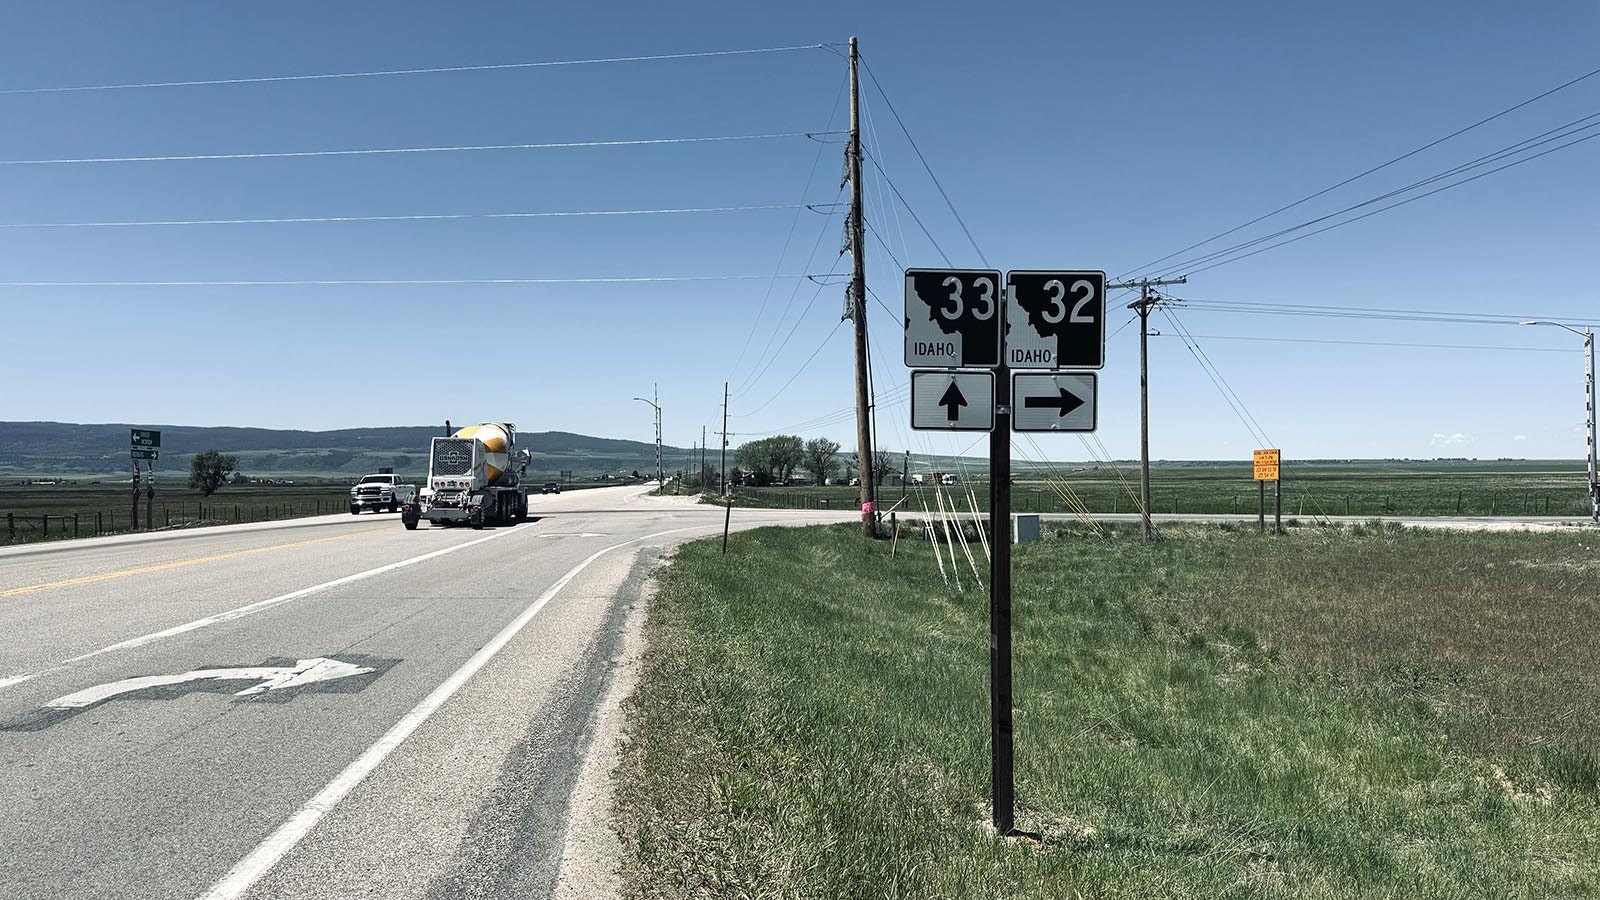 Idaho State Route 33 is the major thoroughfare that runs through the Potato Belt communities of Teutonia, Driggs and Victor. In the sign above, Idaho SR 32 is one of the roads that a driver would take in order to travel to Reclamation Road — still about another 25 miles away to the north.